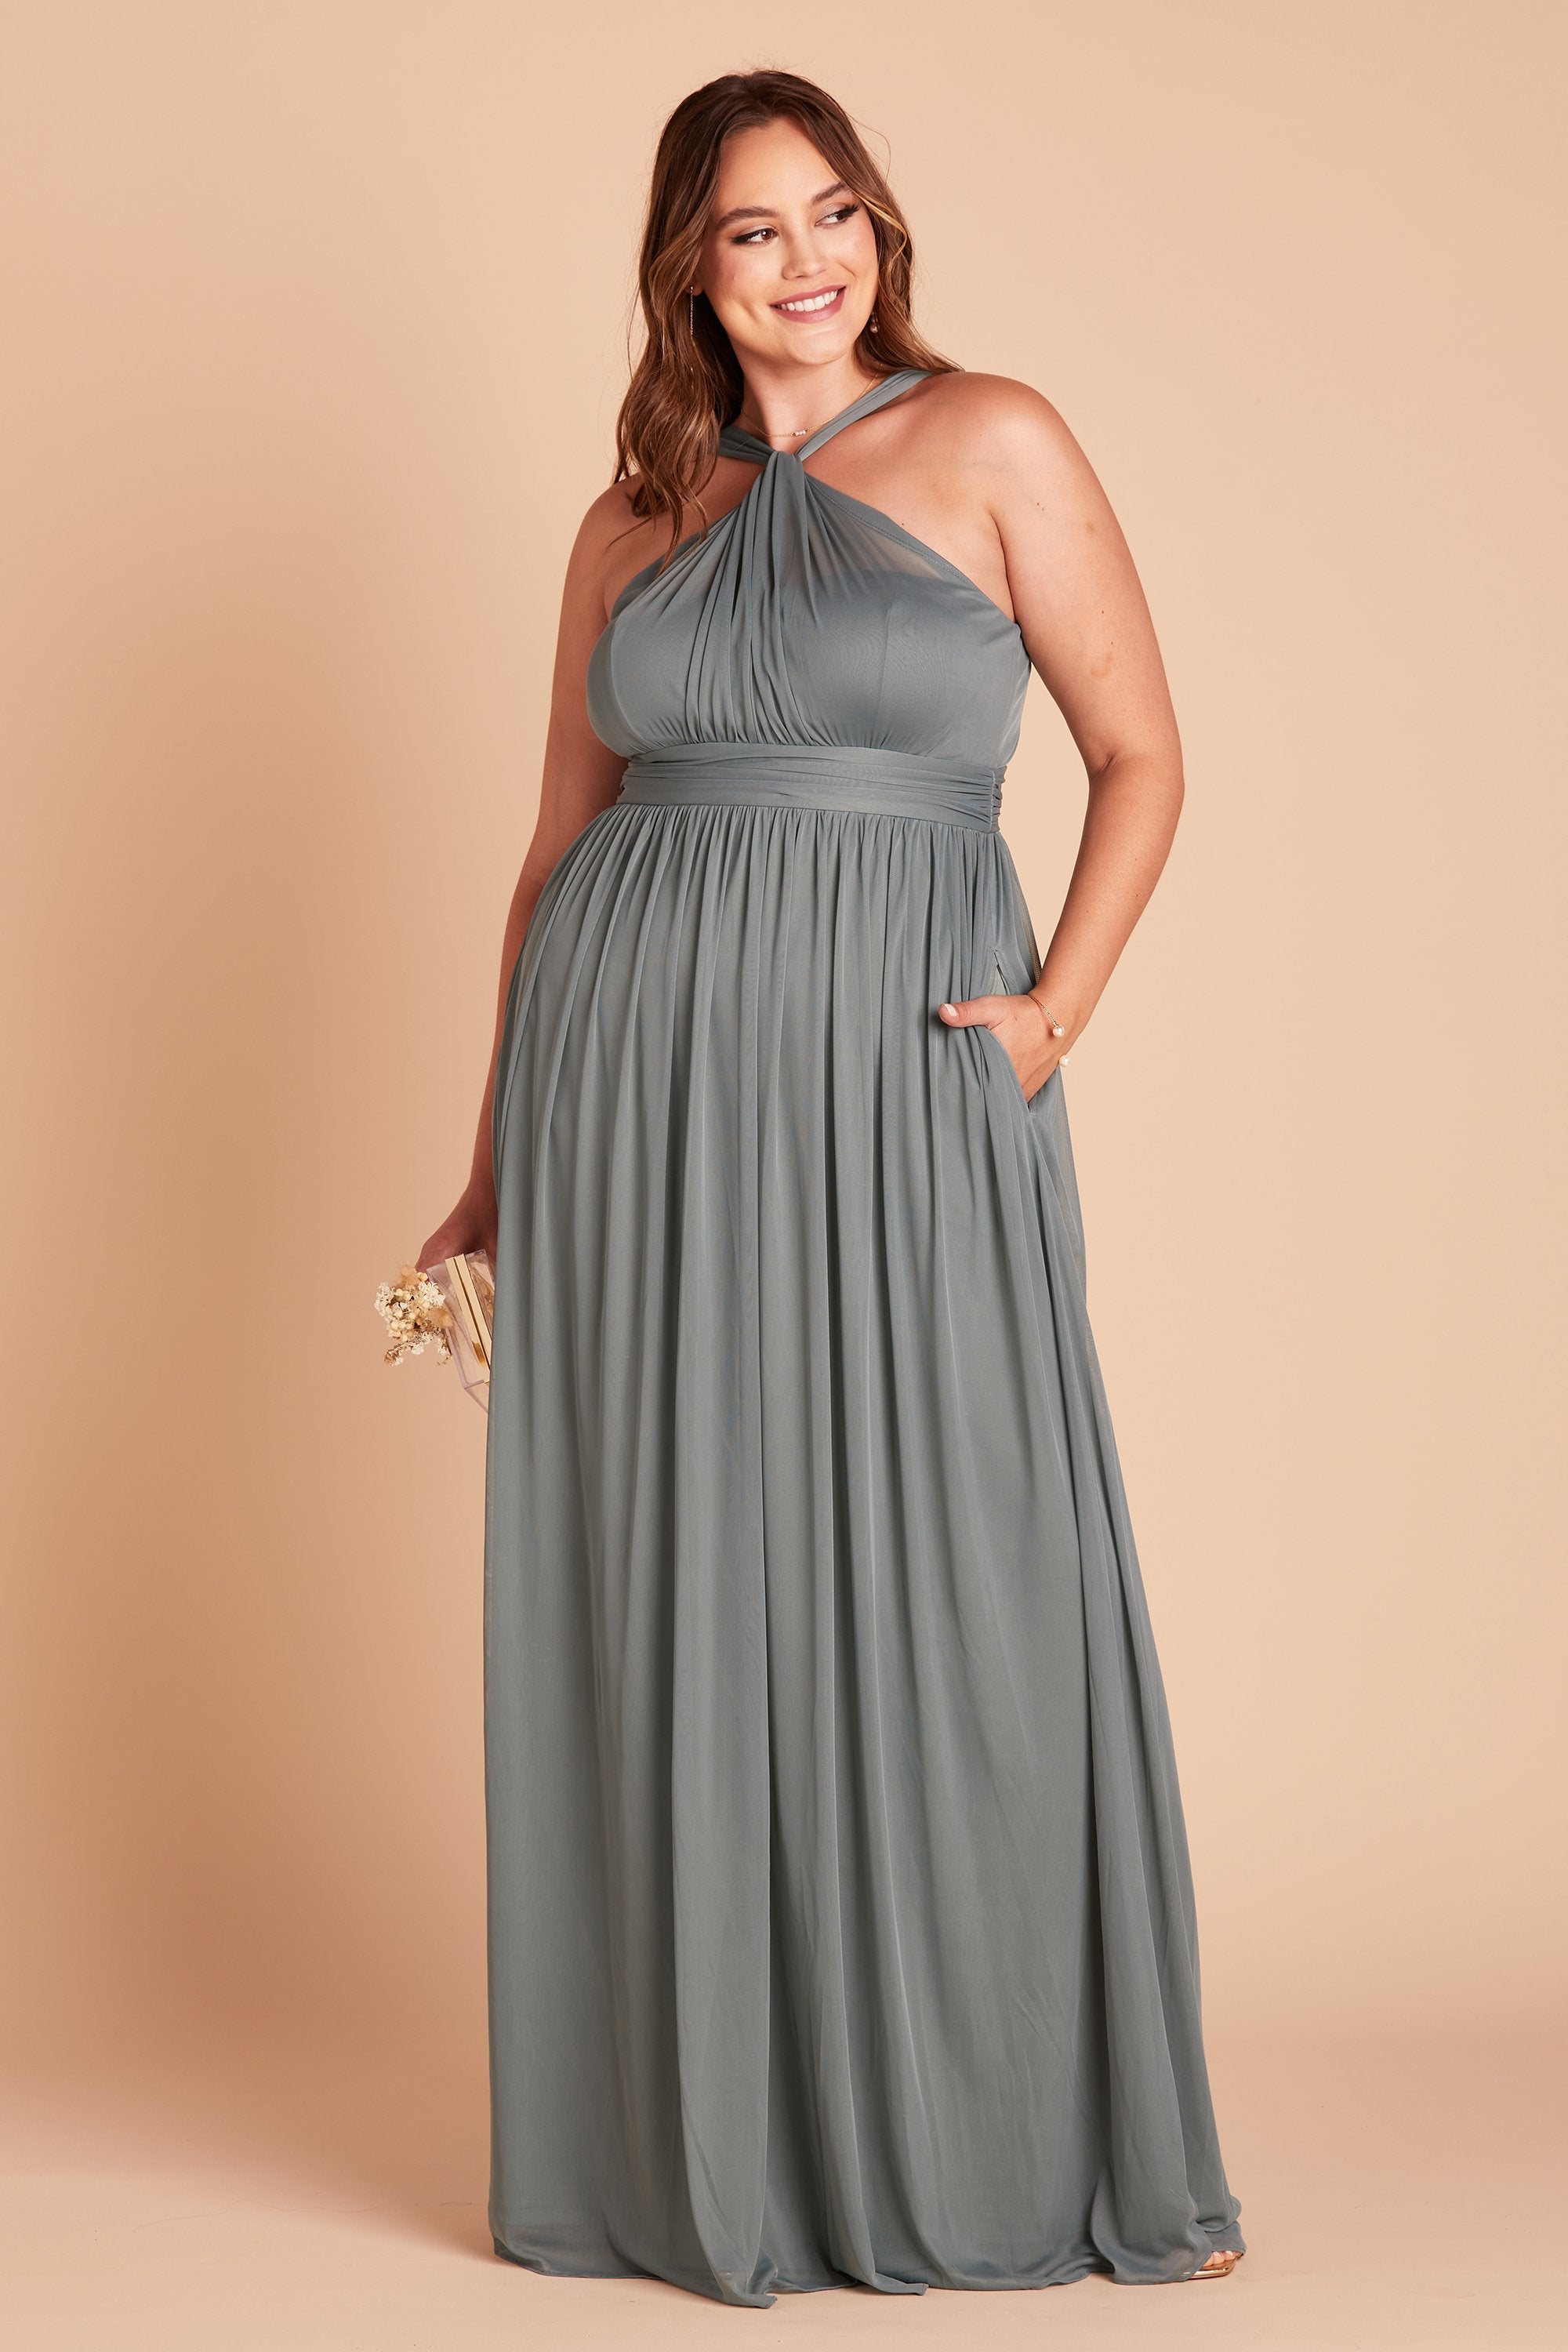 Kiko plus size bridesmaid dress in sea glass green chiffon by Birdy Grey, front view with hand in pocket